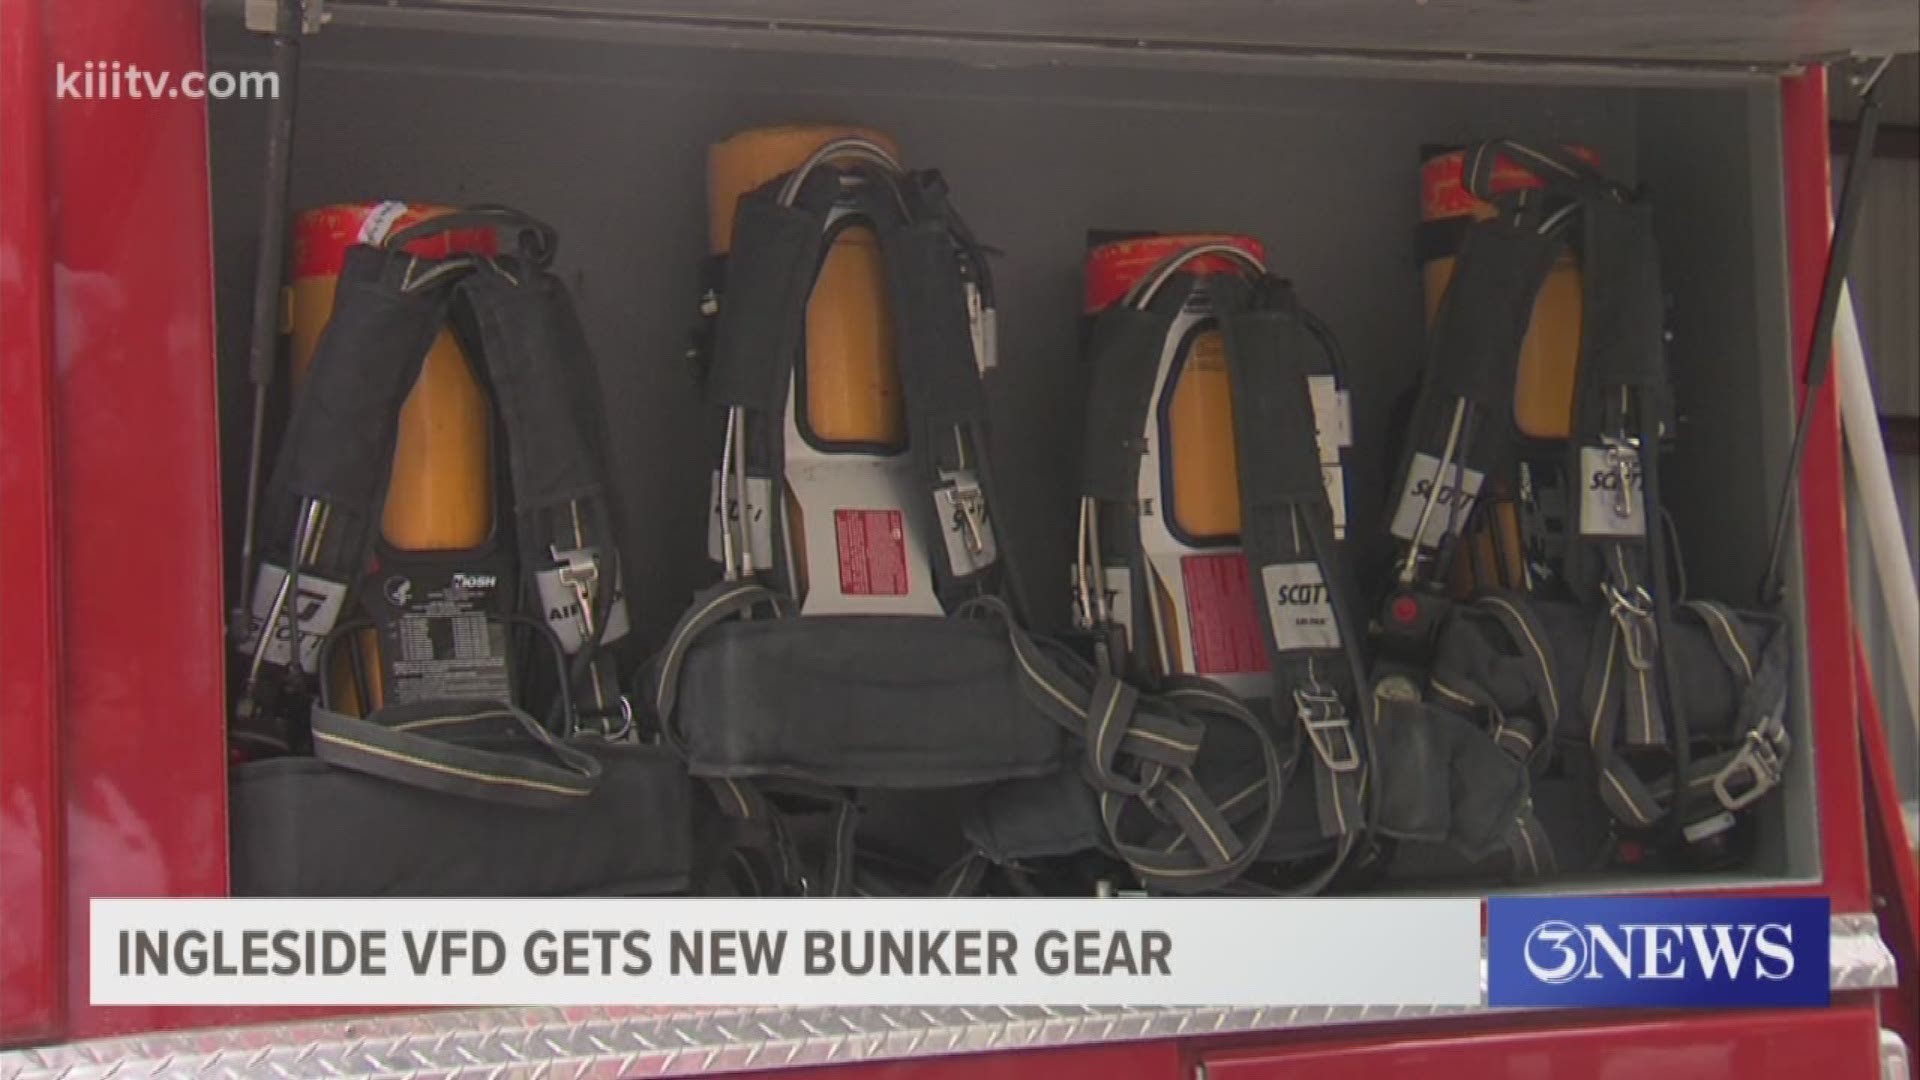 Firefighters with the Ingleside on the Bay volunteer fire department received brand new equipment to use to help keep residents safe in the community.